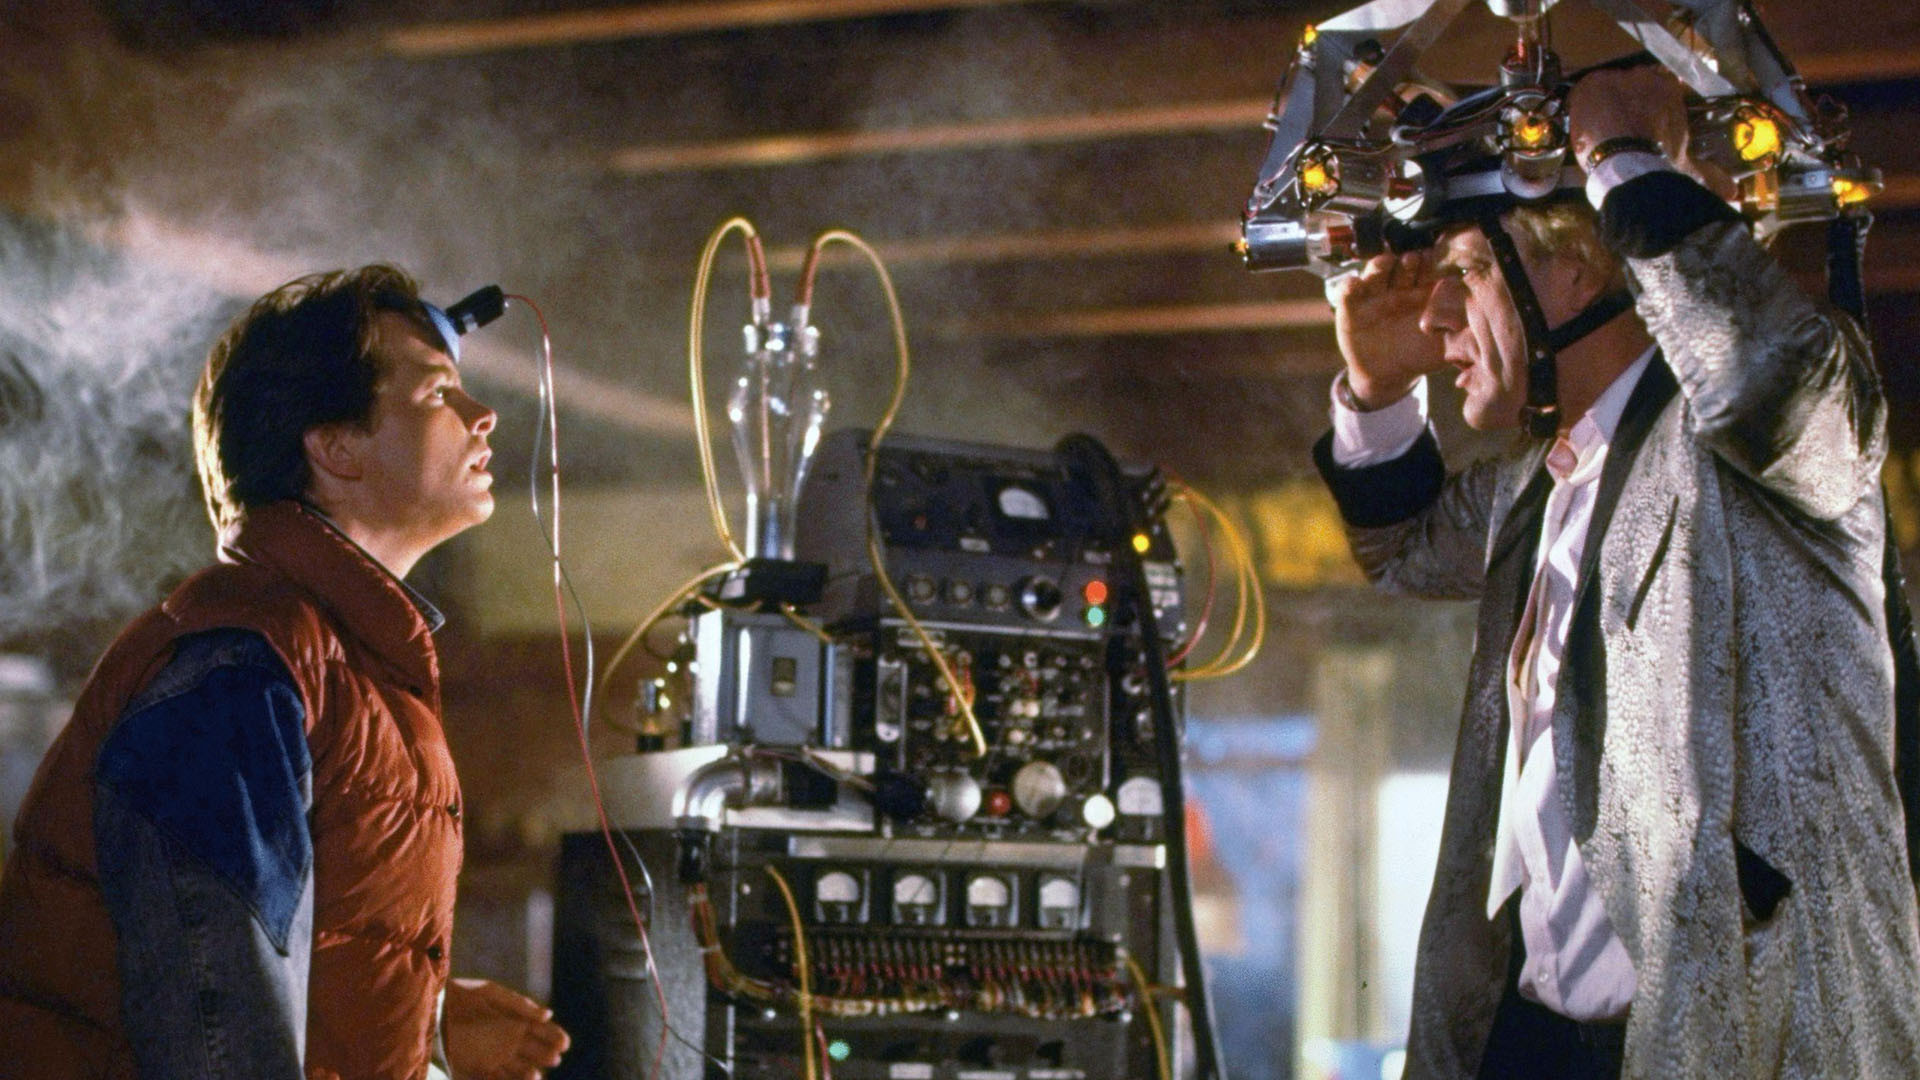 Still from Back to the Future of Marty and the Doc looking at each other while wearing various hi-tech apparatuses